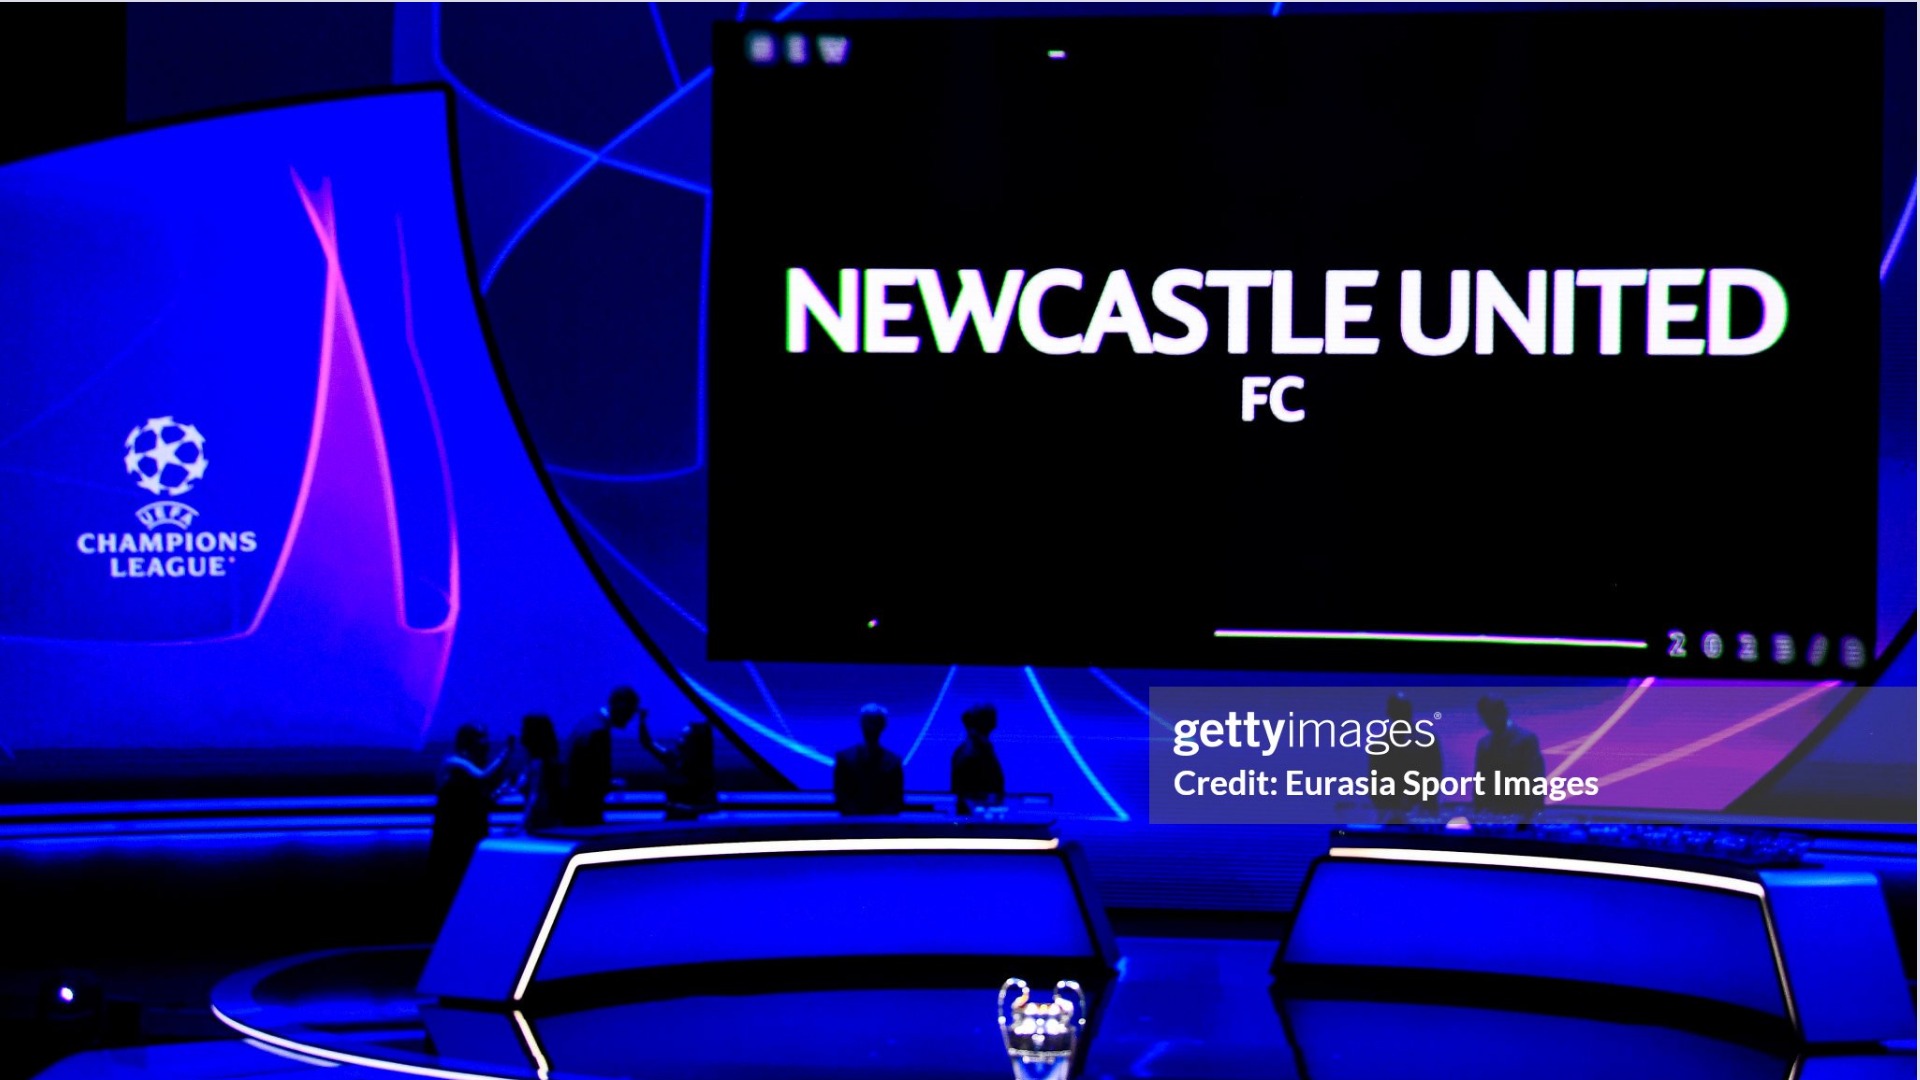 Newcastle in a Champions League draw.